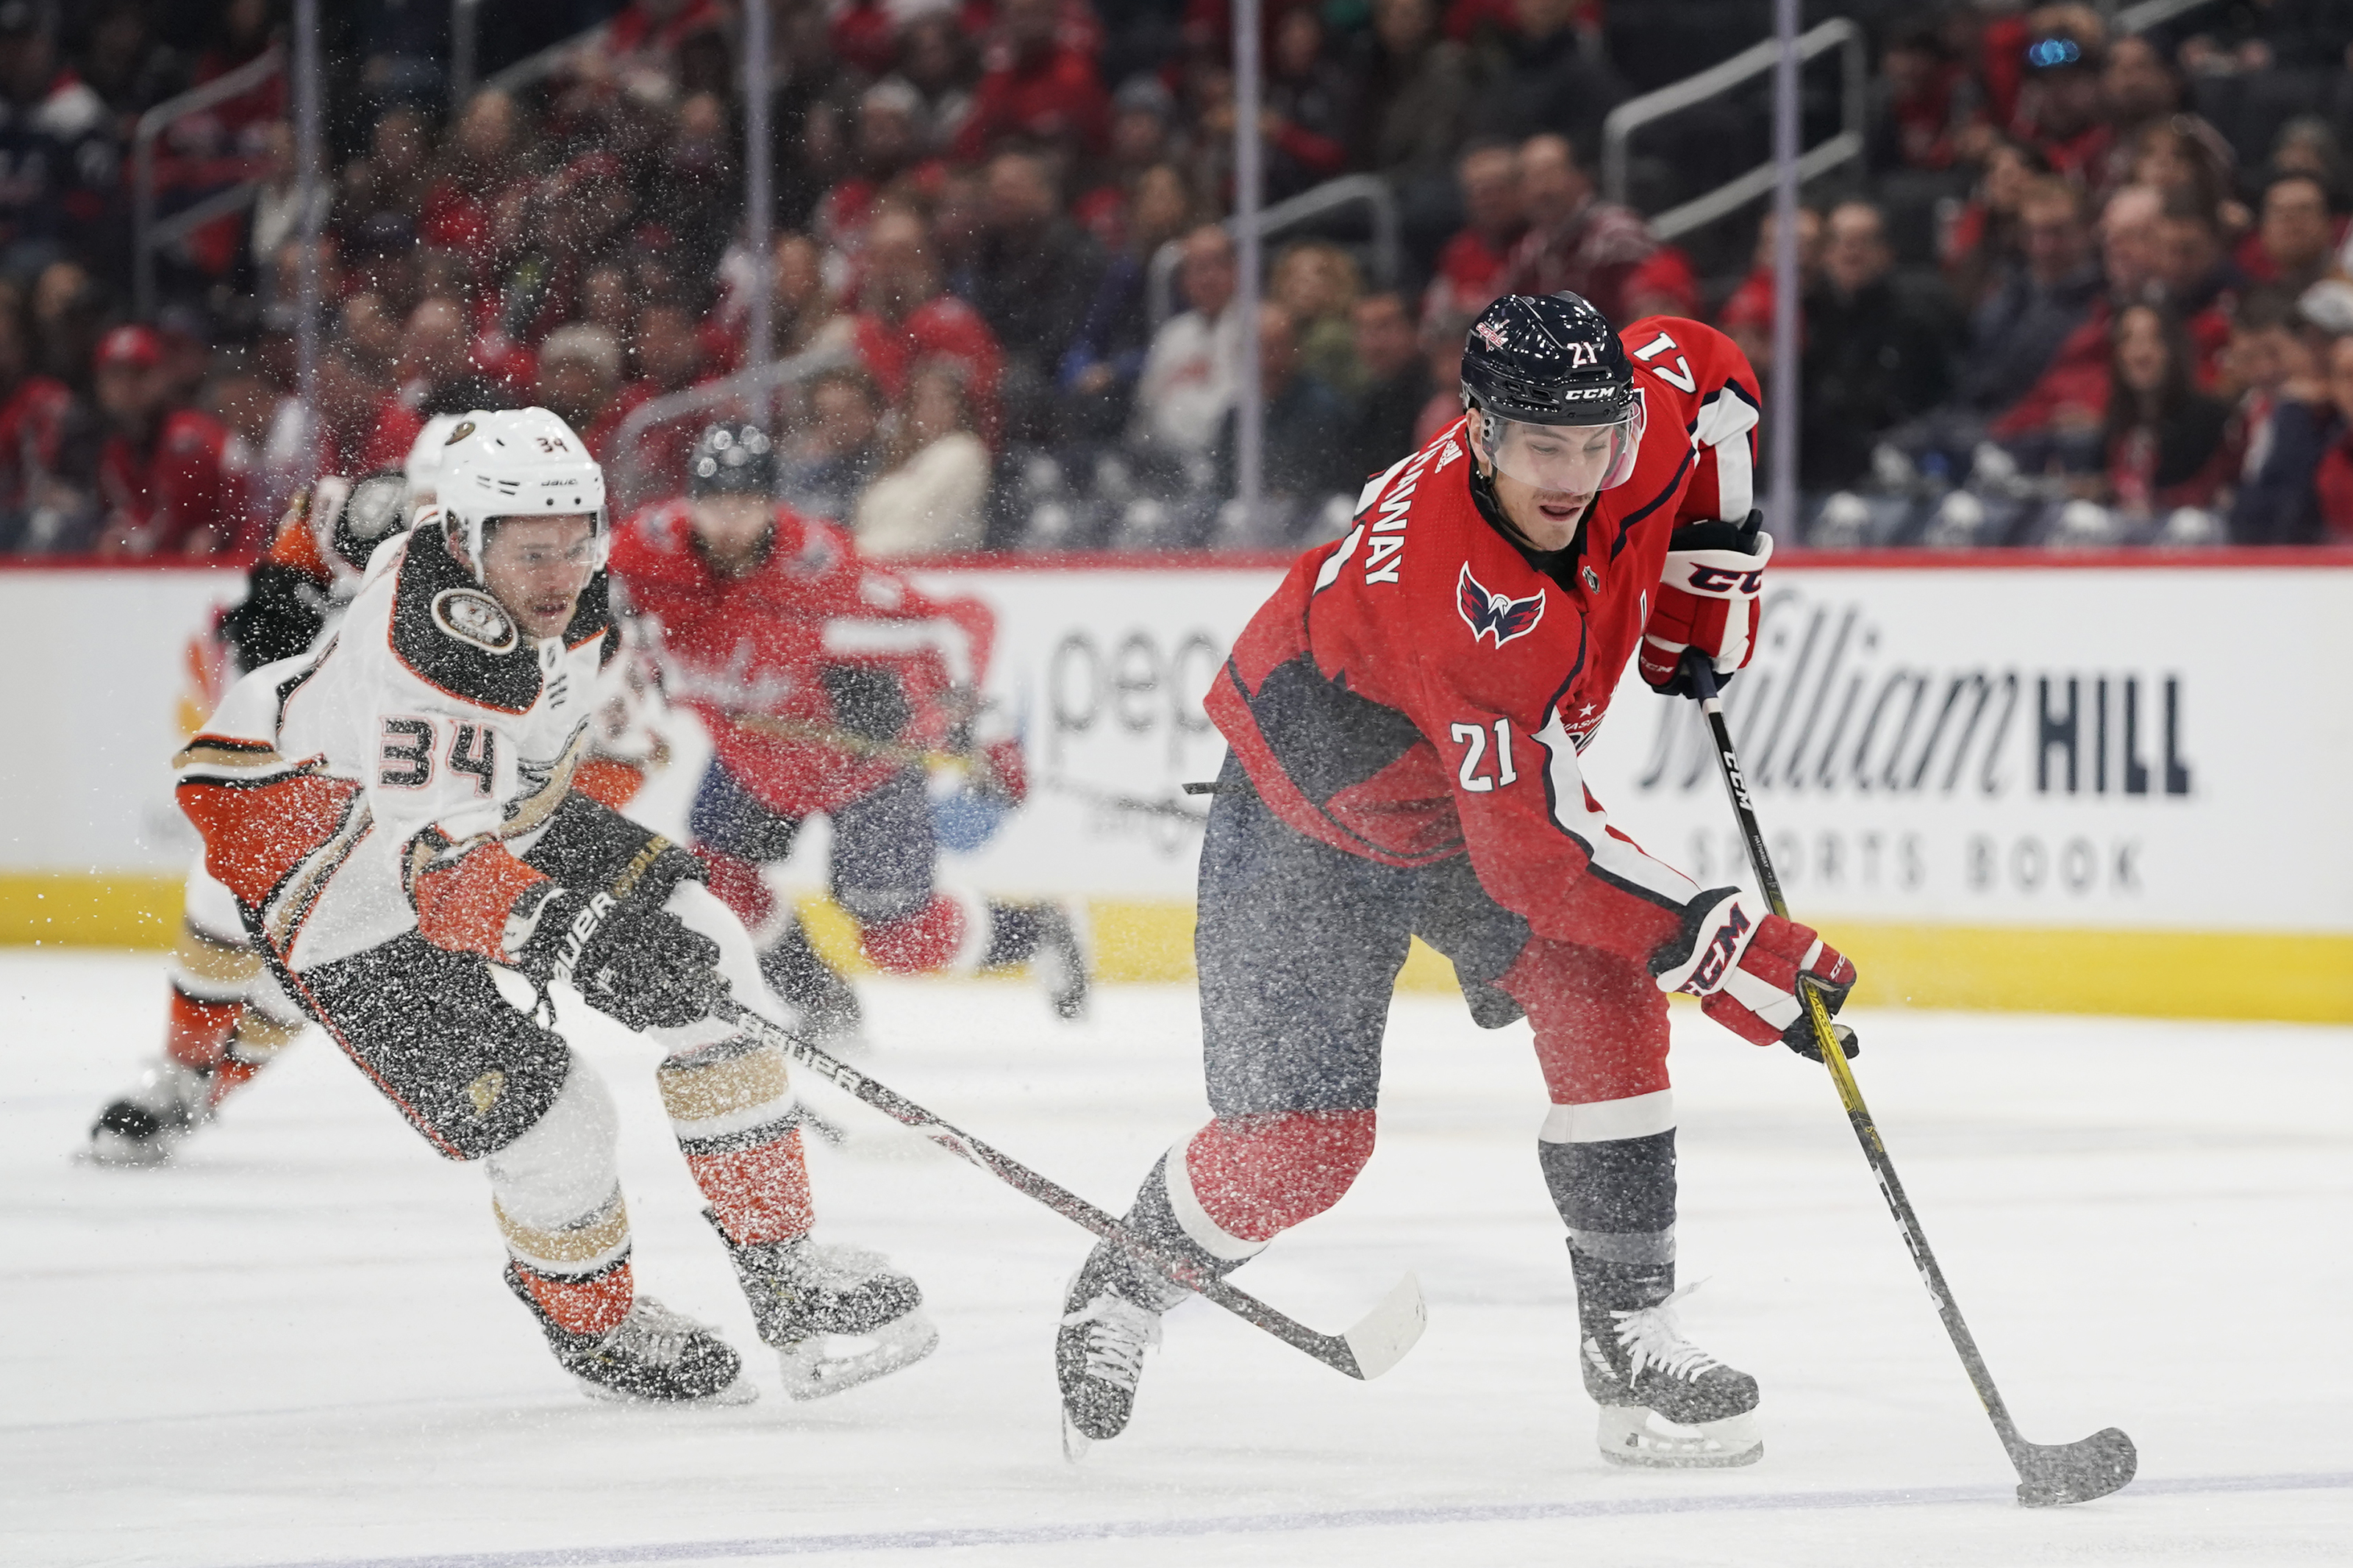 Capitals vs Ducks Date, Time, Streaming and More